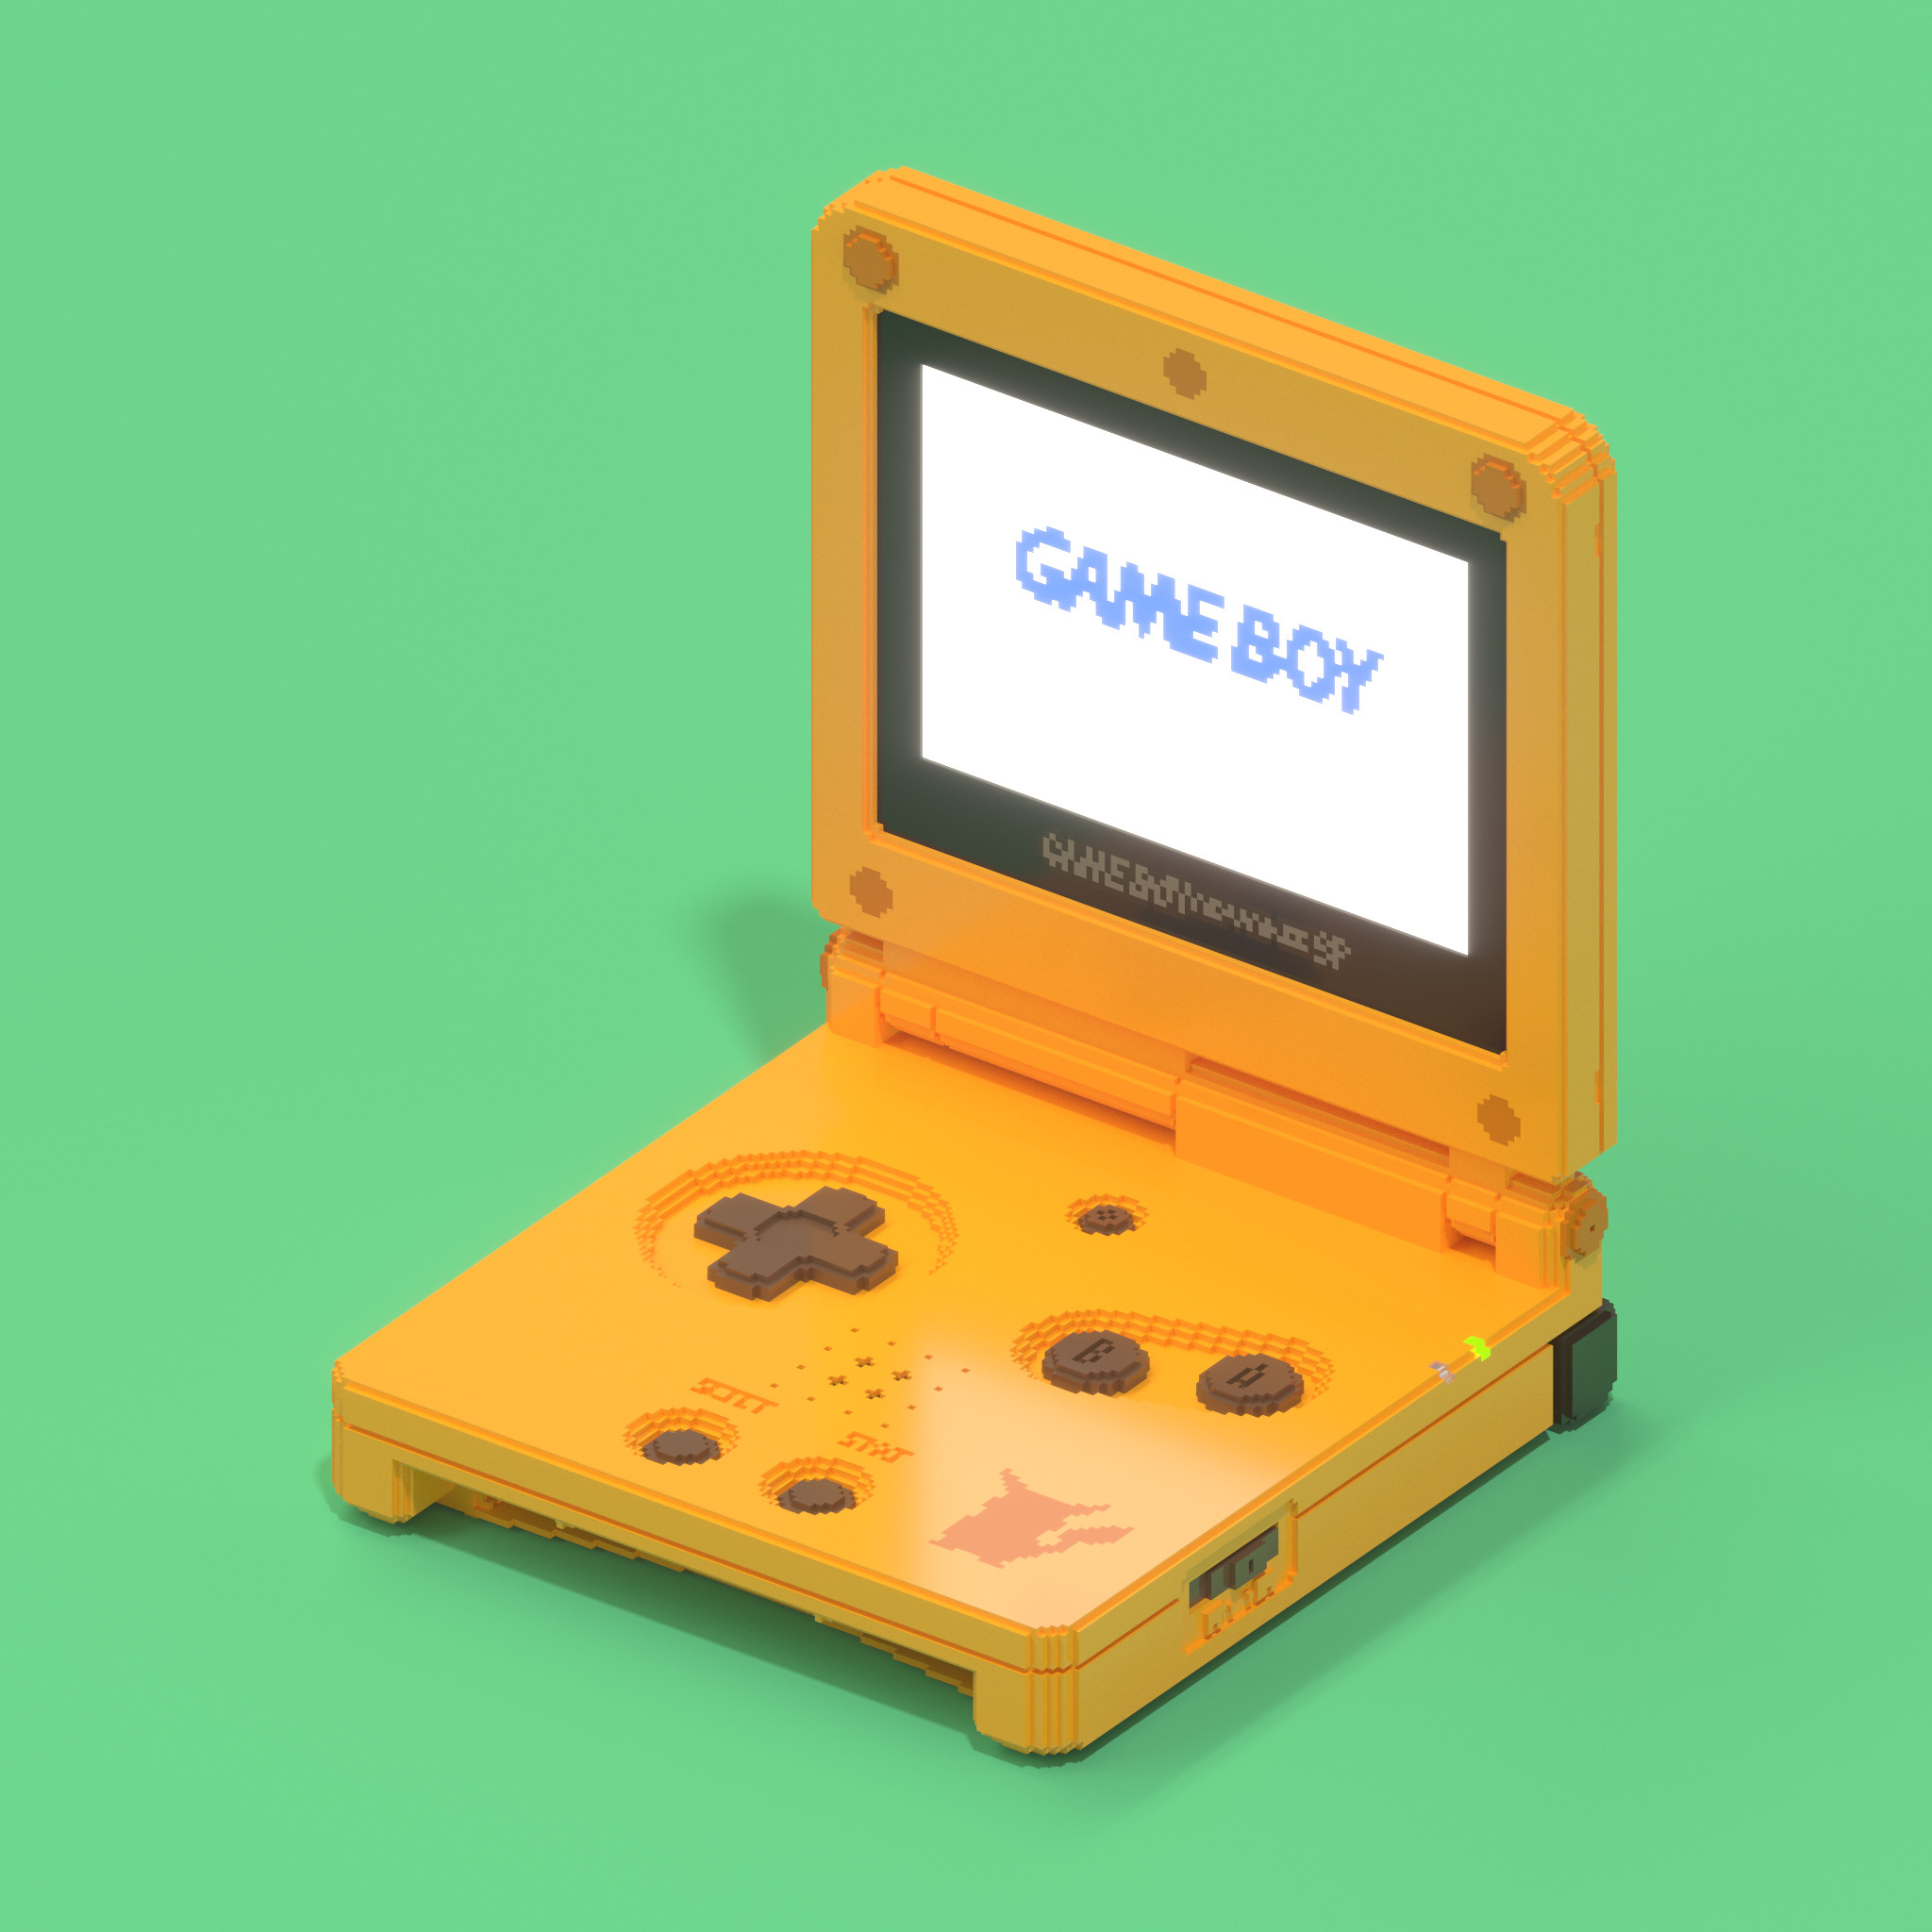 Voxel model on a Nintendo Game Boy Advance SP AGS-101.